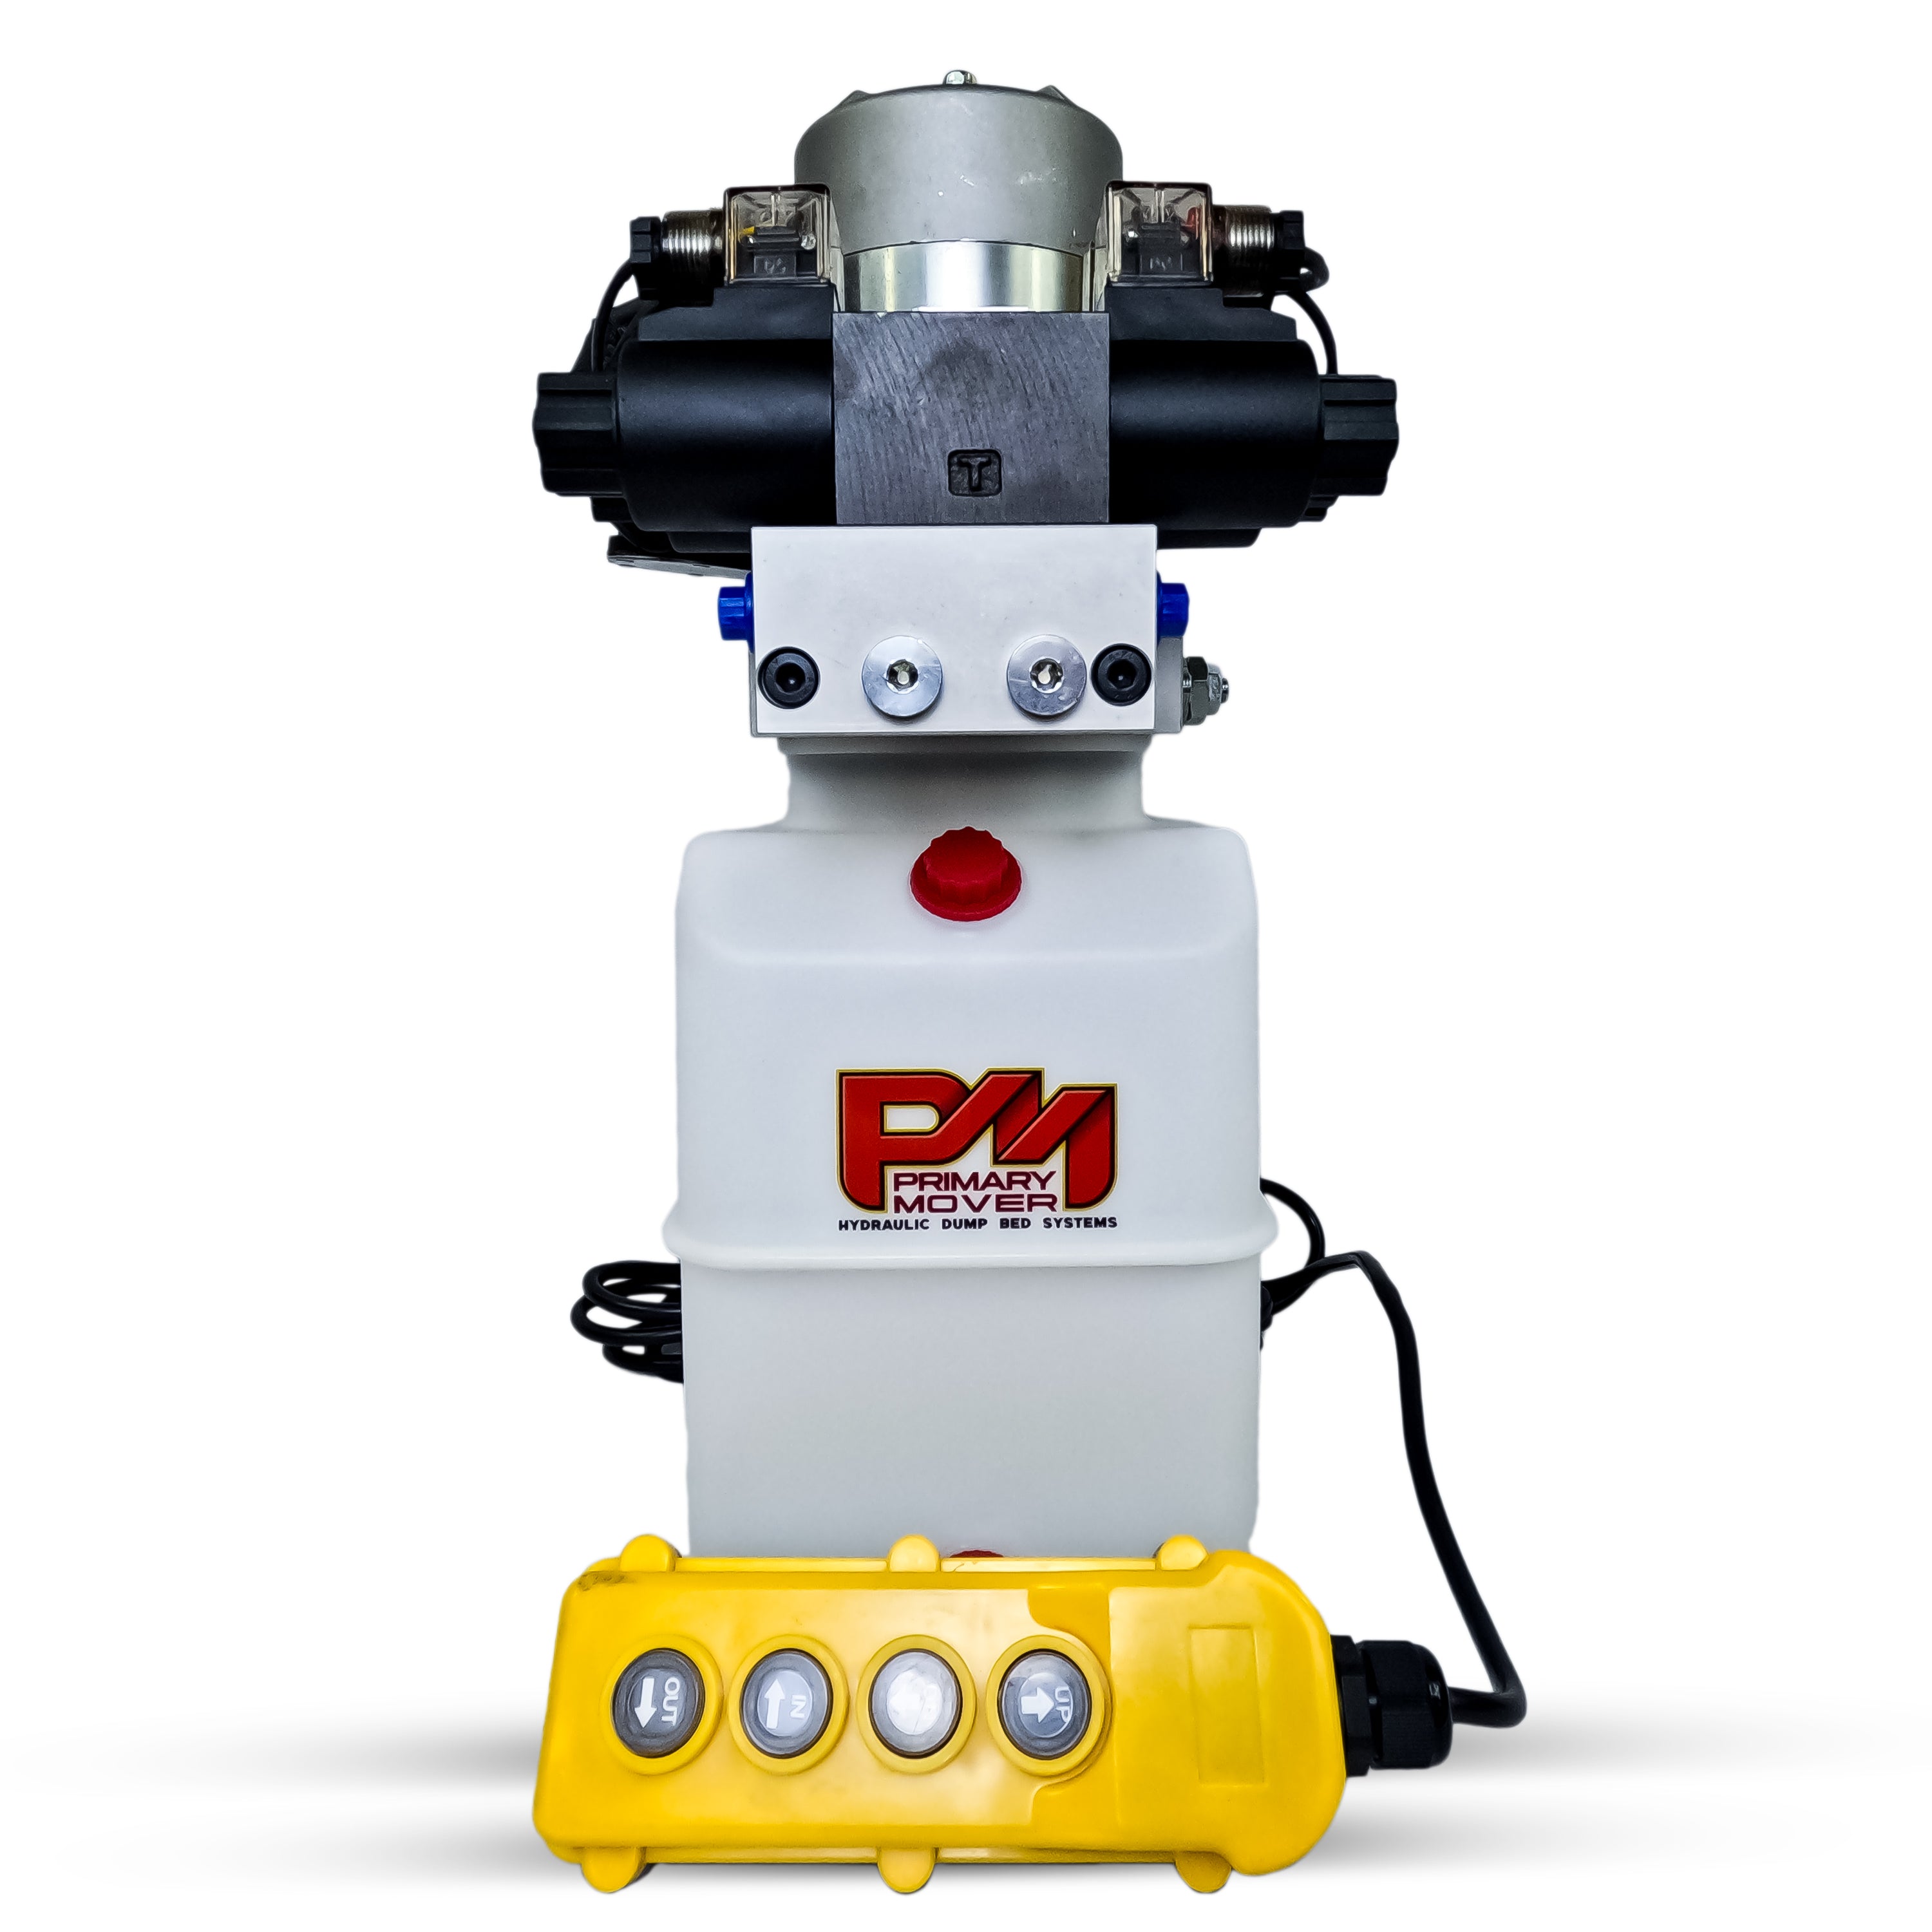 Primary Mover 12V Dual Double-Acting Hydraulic Power Unit: Compact, robust unit for dump trailers and trucks, enabling four hydraulic actions simultaneously.